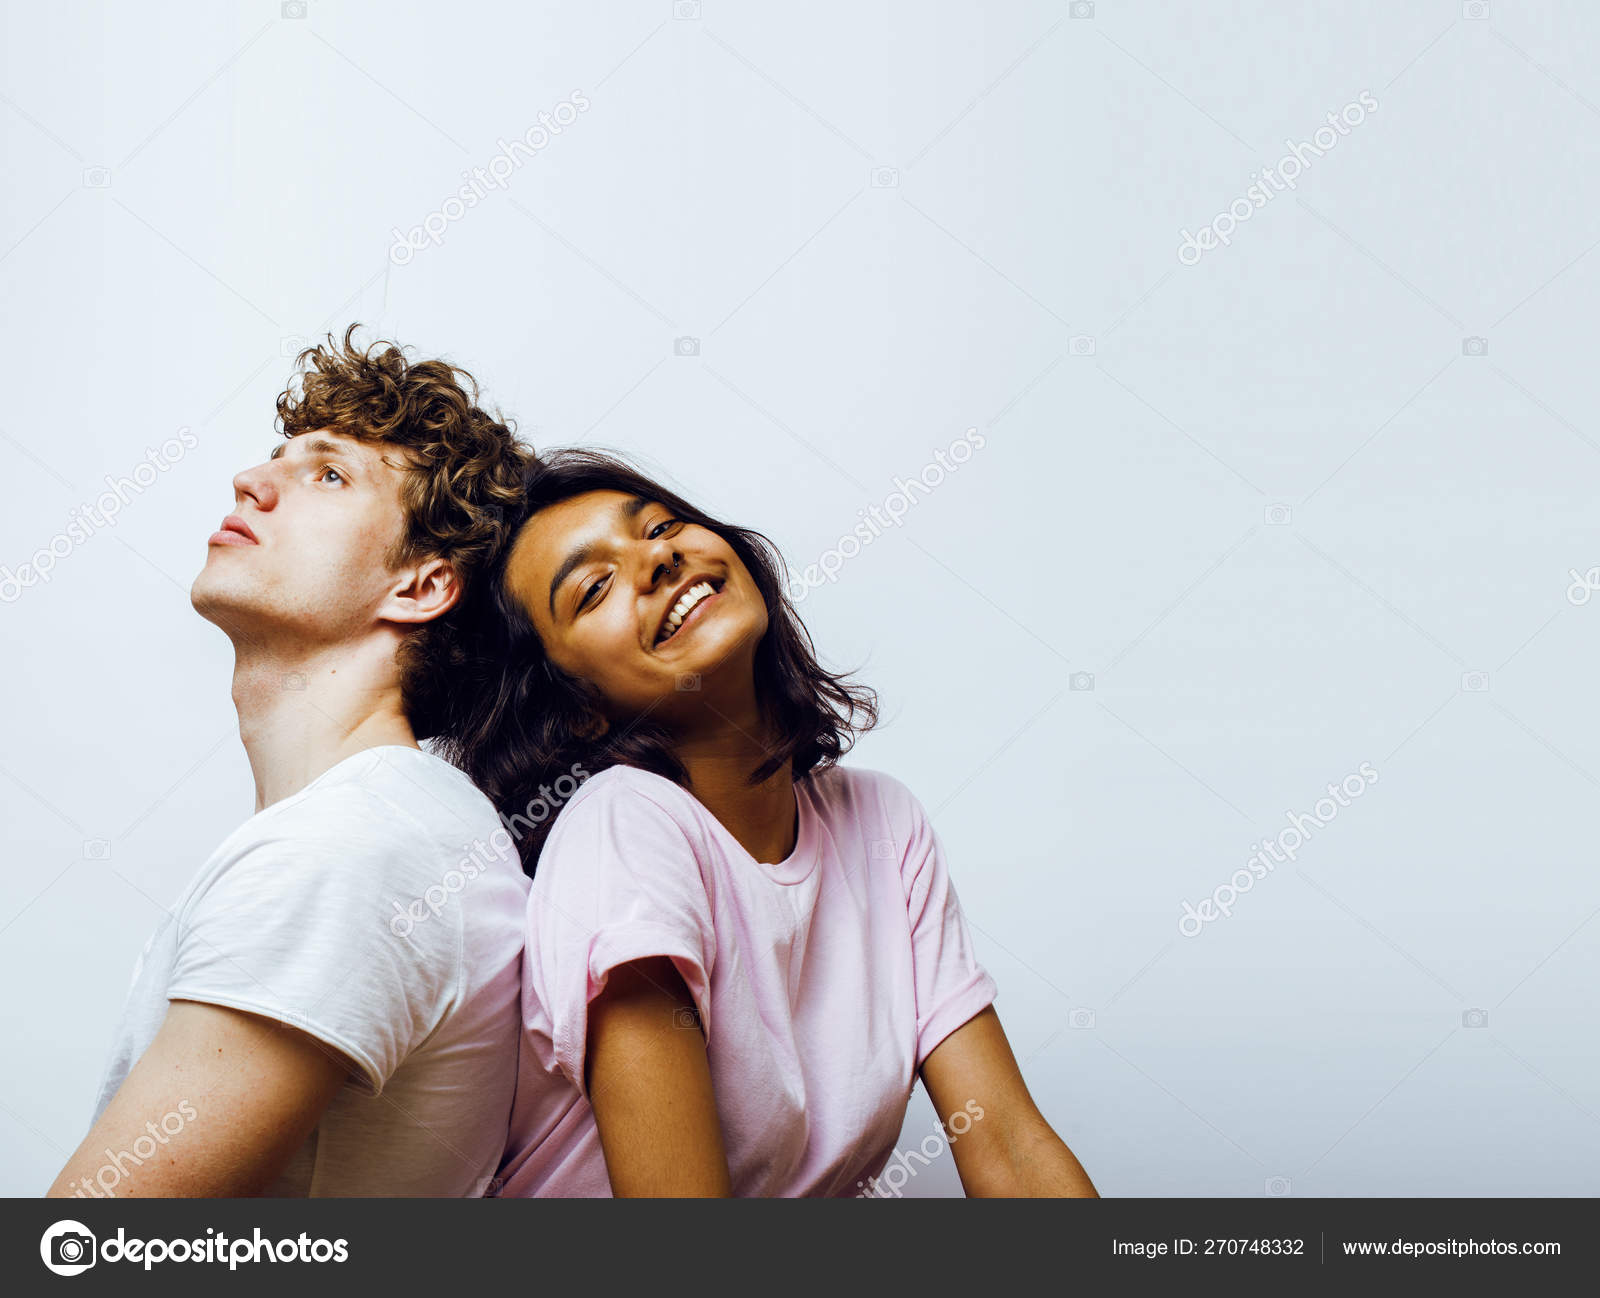 Best Friends Teenage Girl And Boy Together Having Fun Posing Emotional On White Background Couple Happy Smiling Lifestyle People Concept Blond And Brunette Multi Nations Close Up Stock Photo By C Iordani